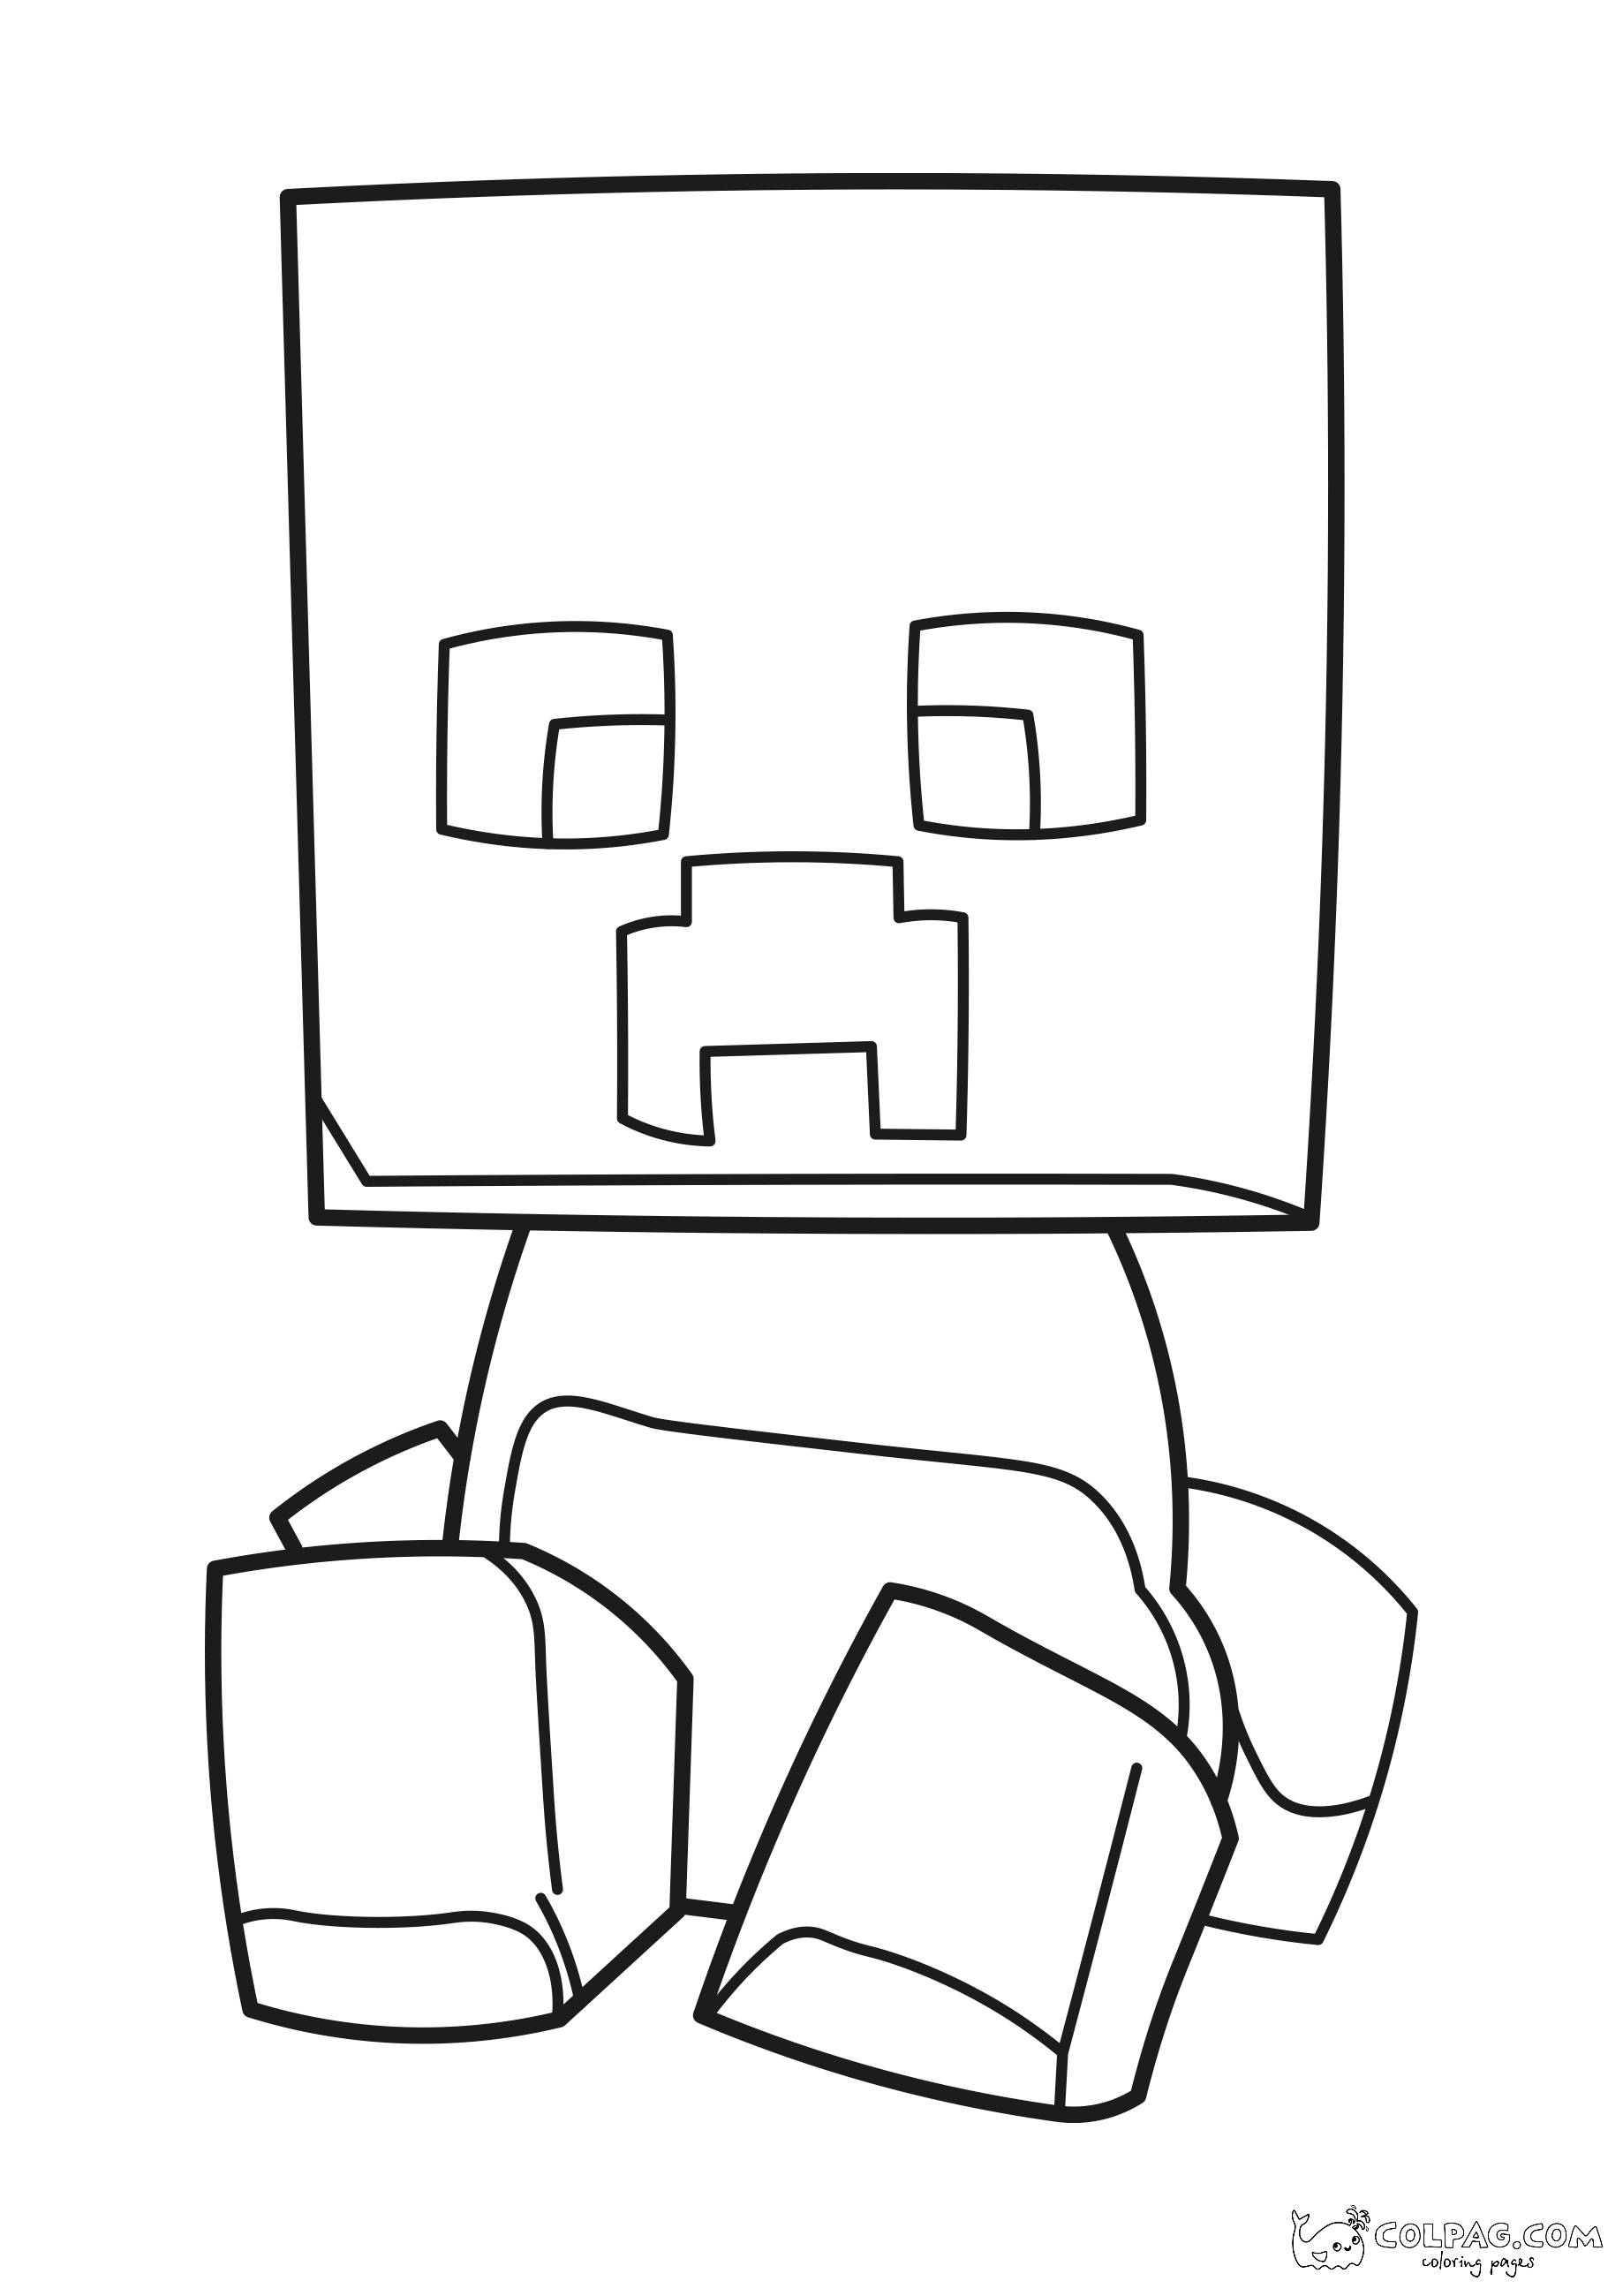 creeper-1-minecraft-coloring-page-colpag